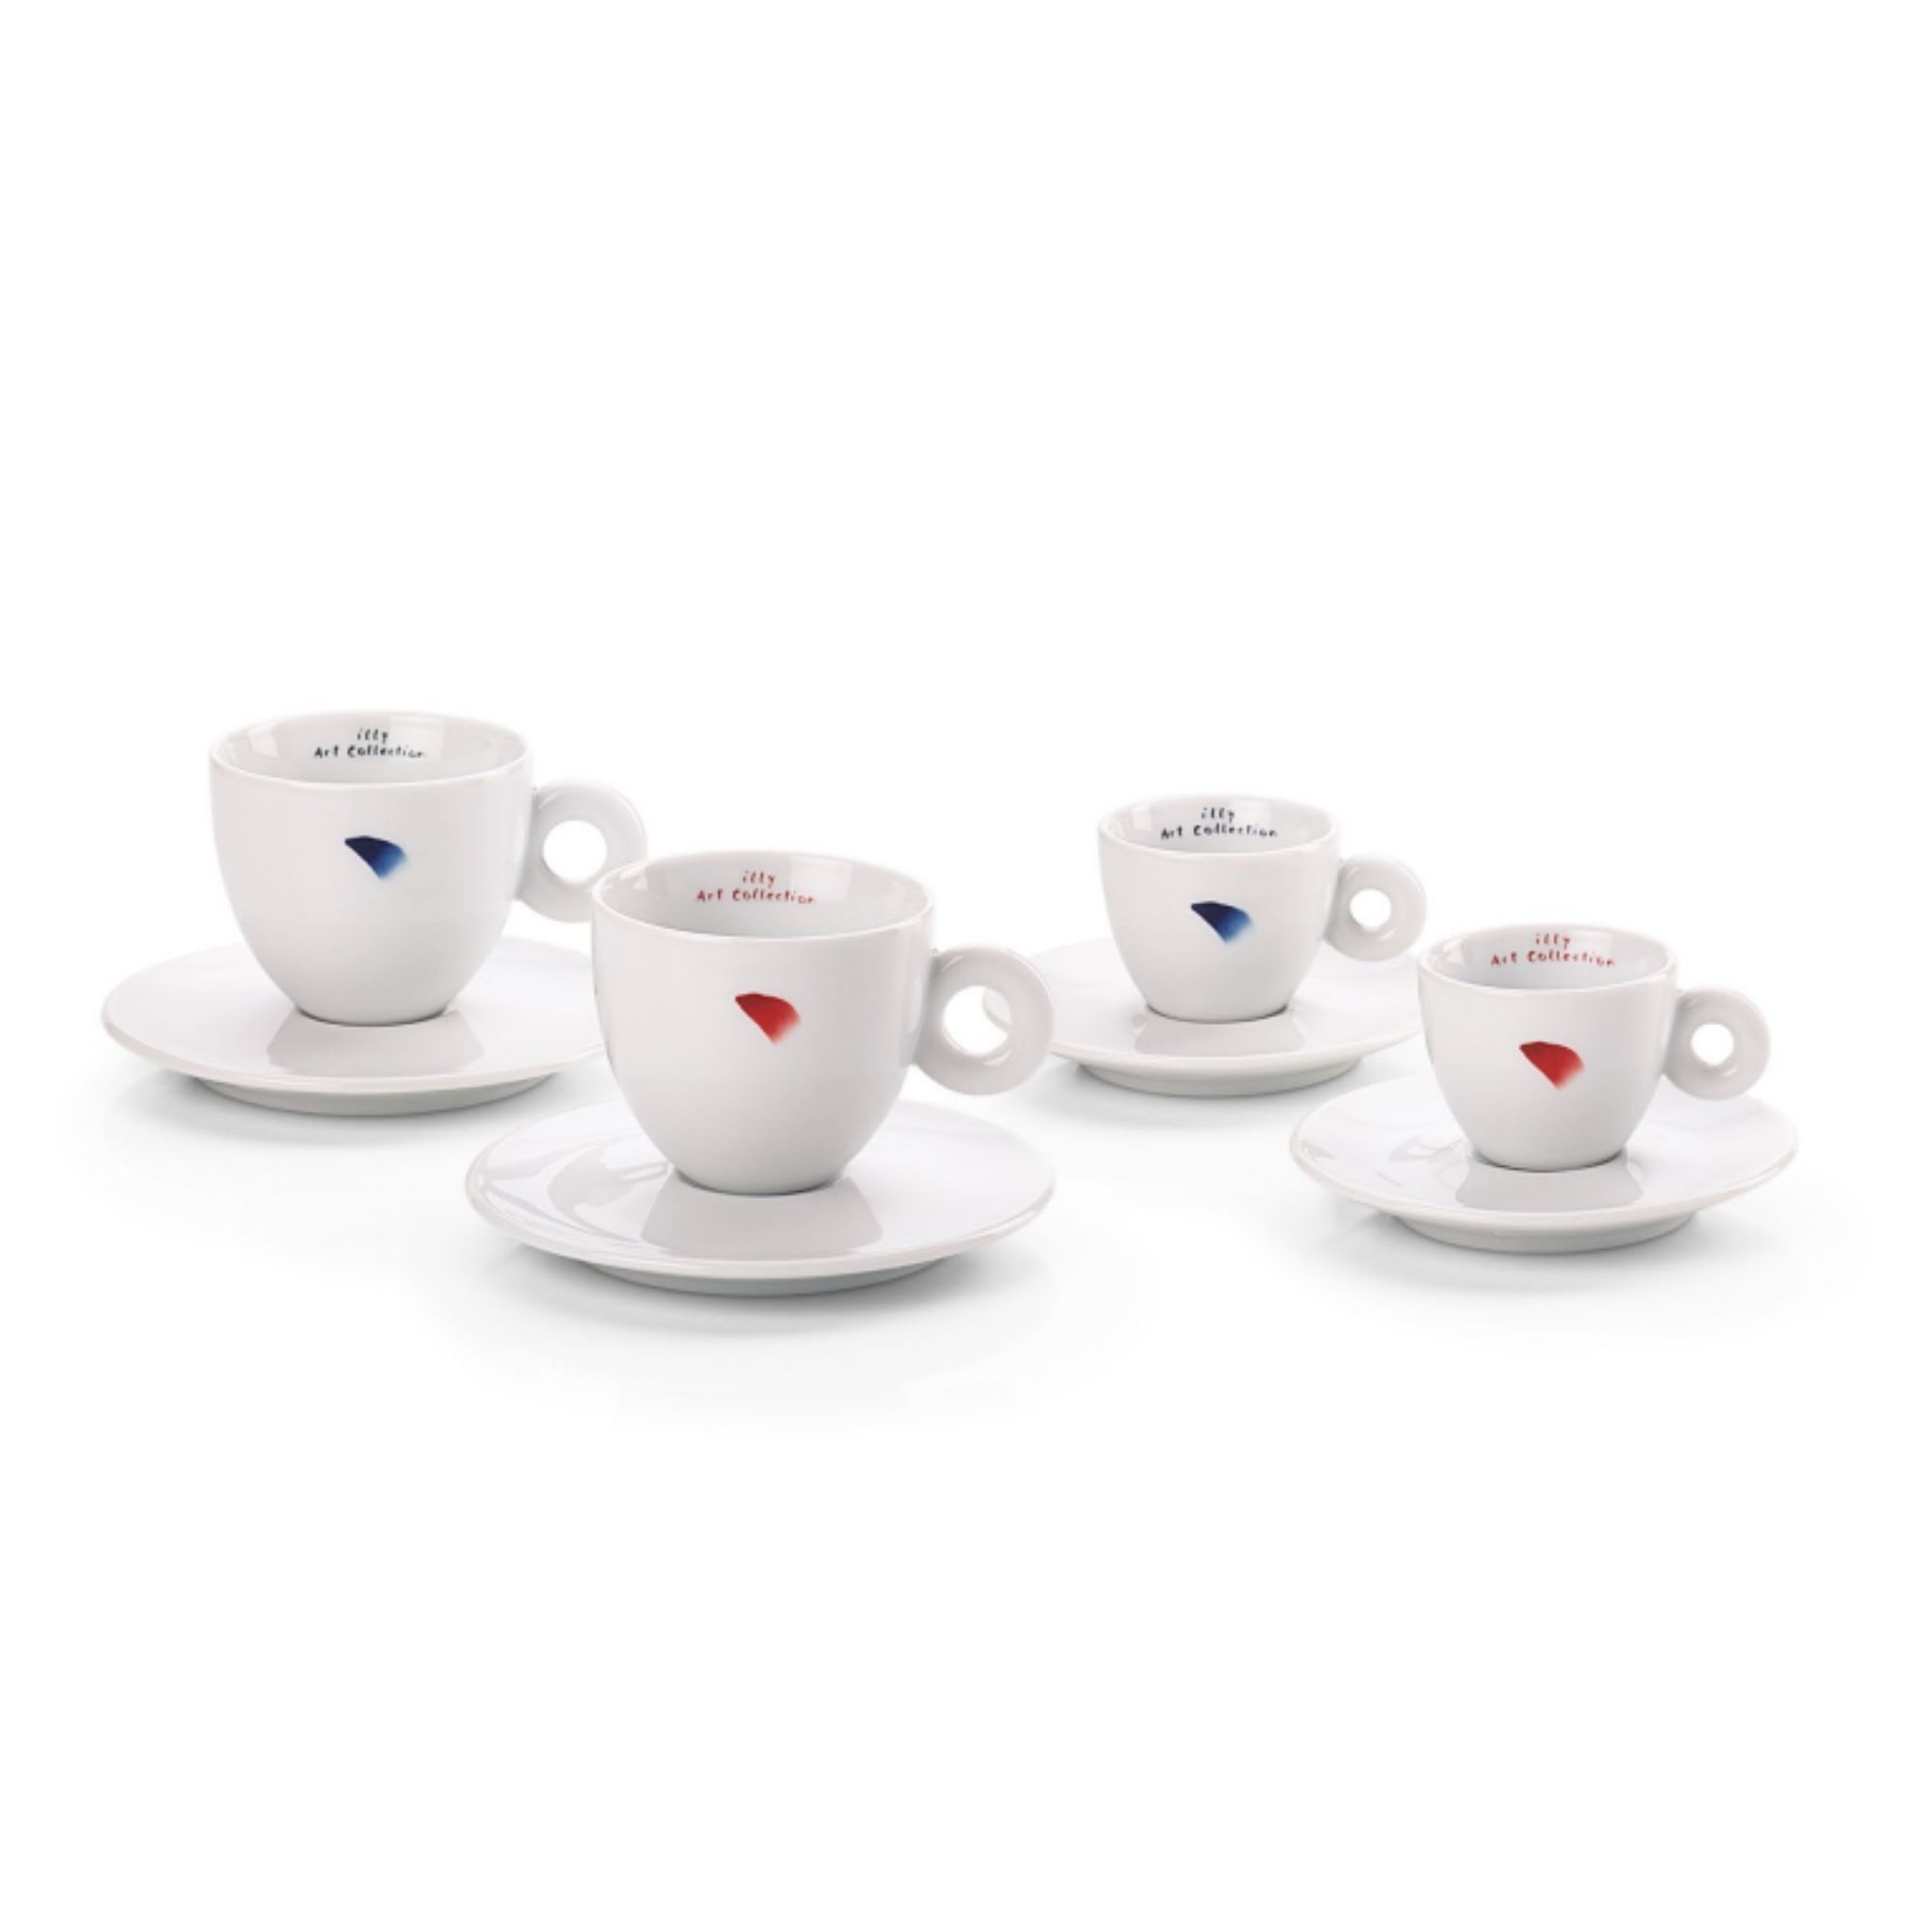 Illy 2 tazze cappuccino Illy Art Collection Lee Ufan